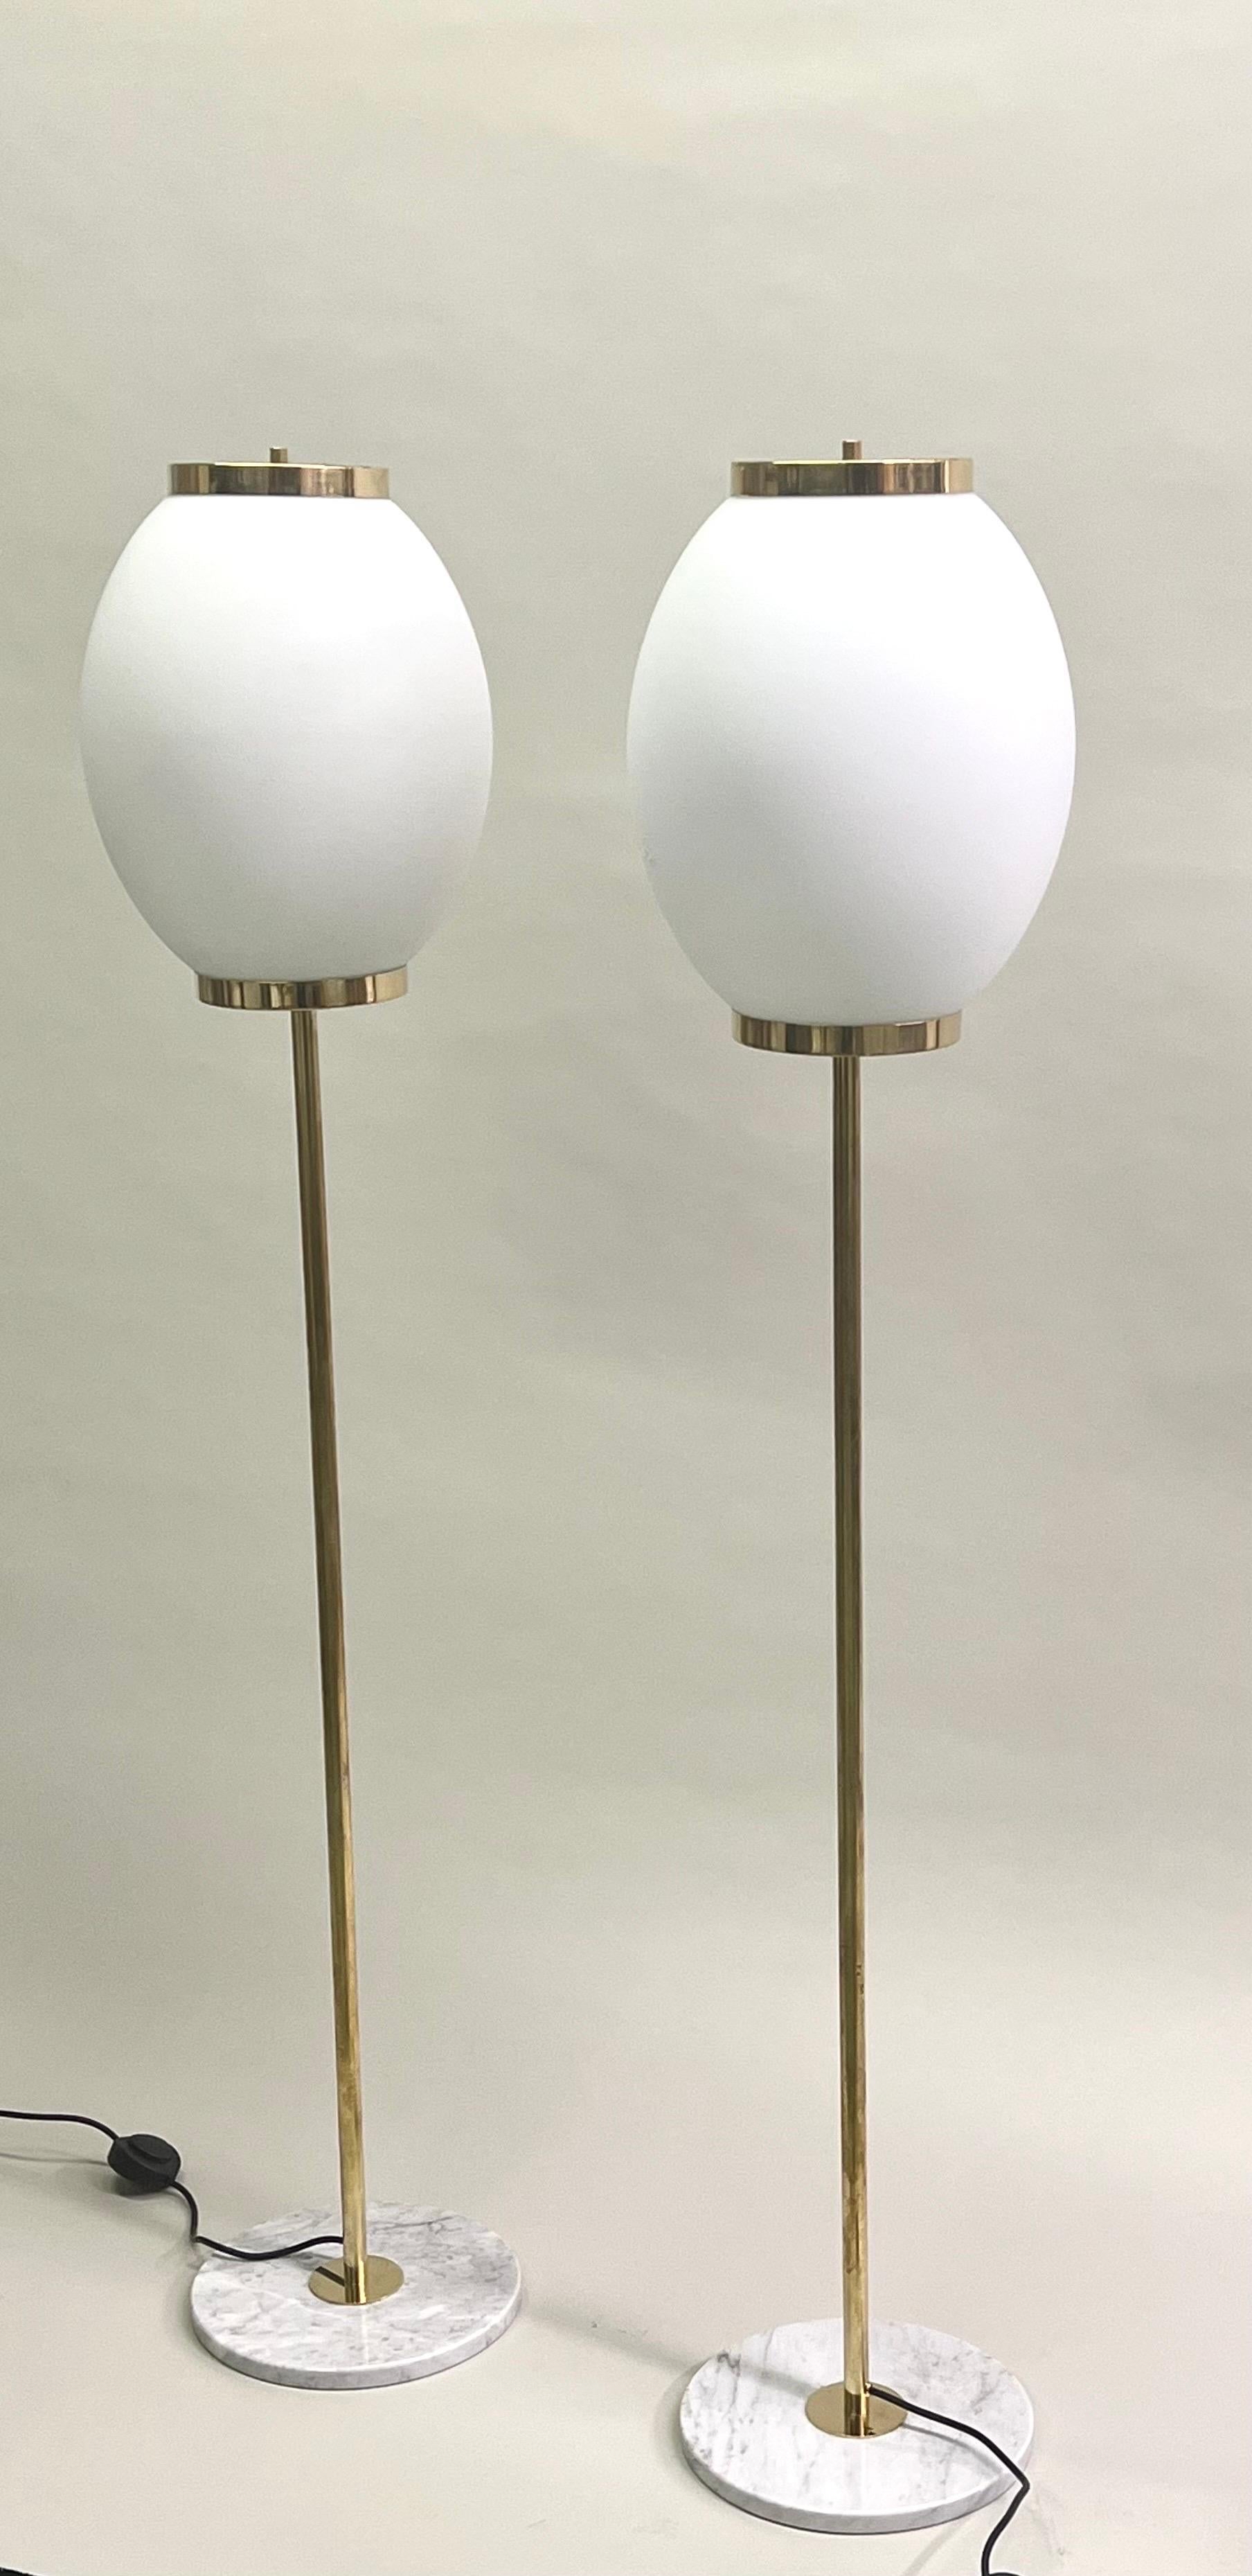 Pair of Italian Mid-Century Modern Style Floor Lamps, Max Ingrand & Fontana Arte In Good Condition For Sale In New York, NY